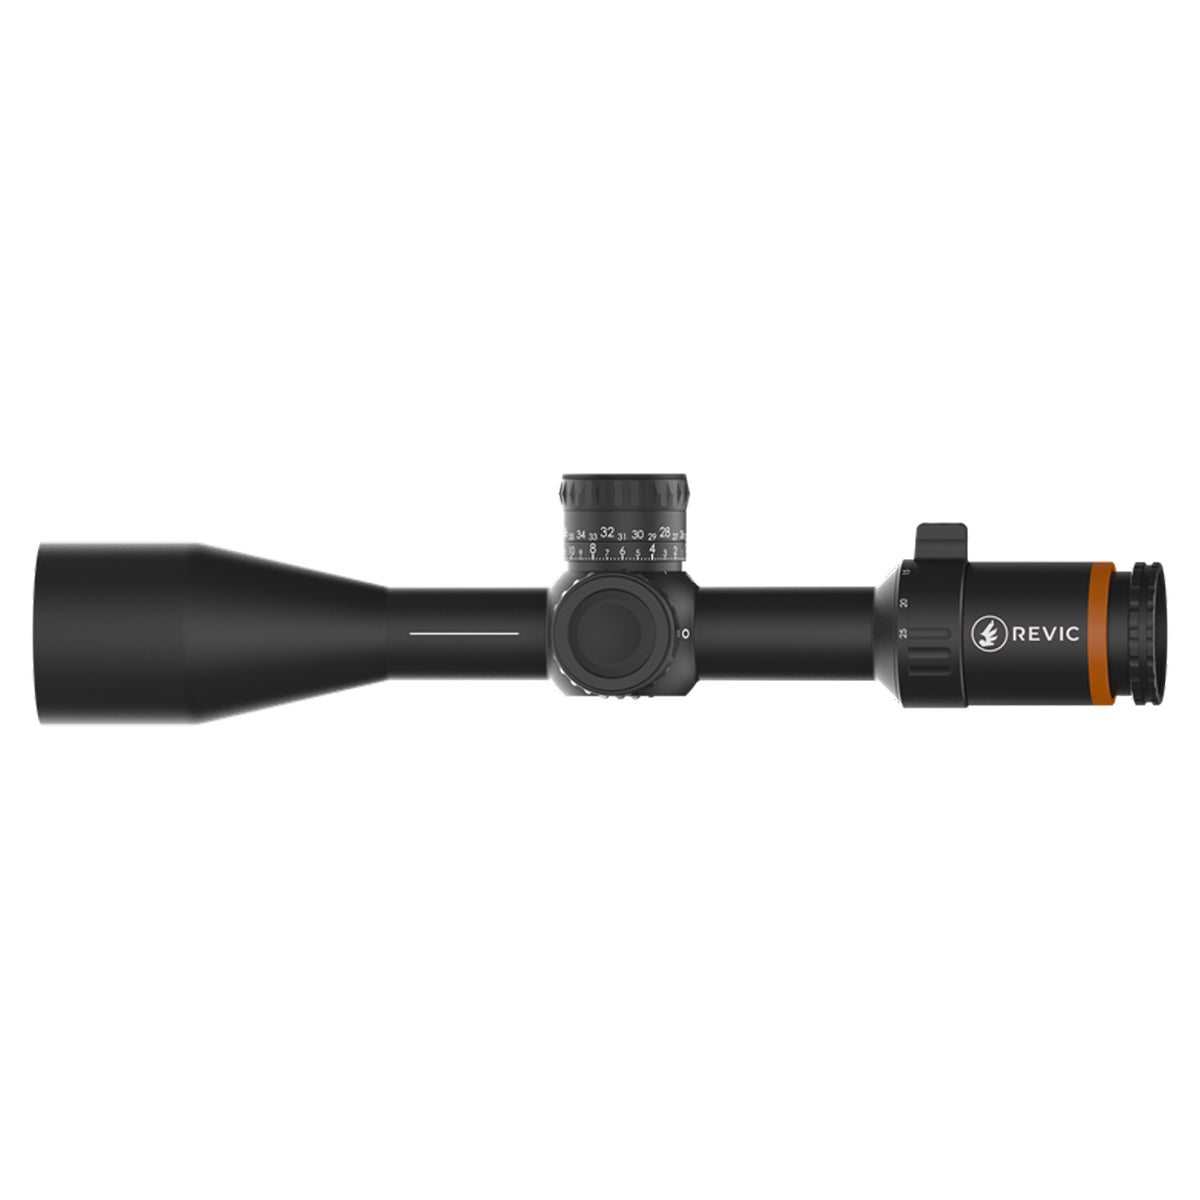 Gunwerks Revic Acura RS25i 5-25x50 Illuminated Riflescope in  by GOHUNT | Revic - GOHUNT Shop